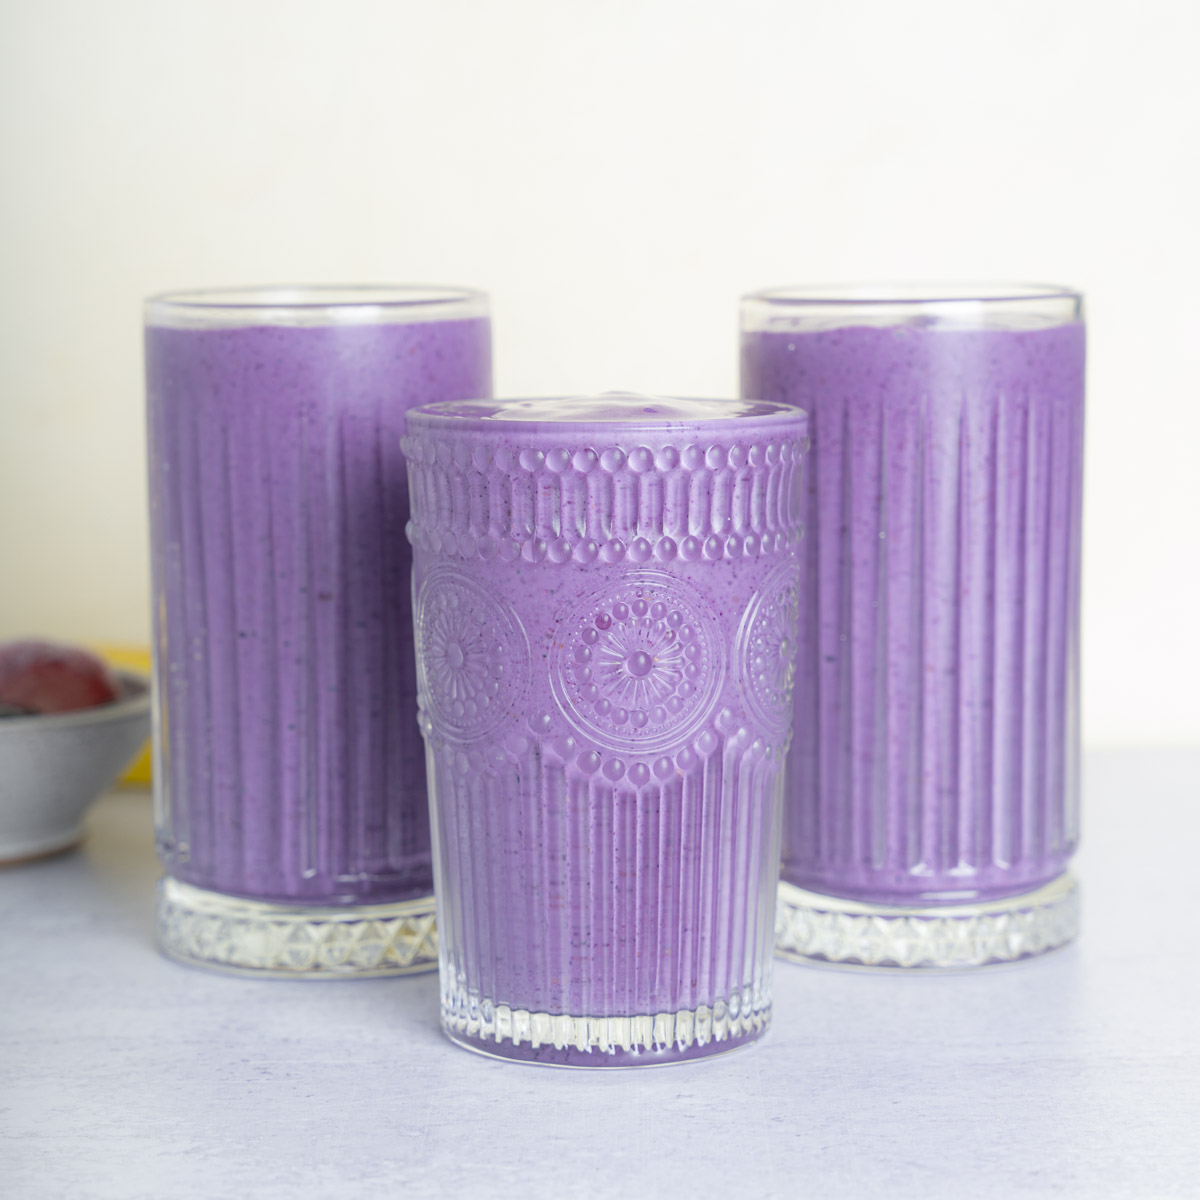 Three glasses of purple-blue colored beverage, the Berry Bliss Smoothie. The photo is take straight on with a small bowl of berries on the right slide of the frame. The background is cream.